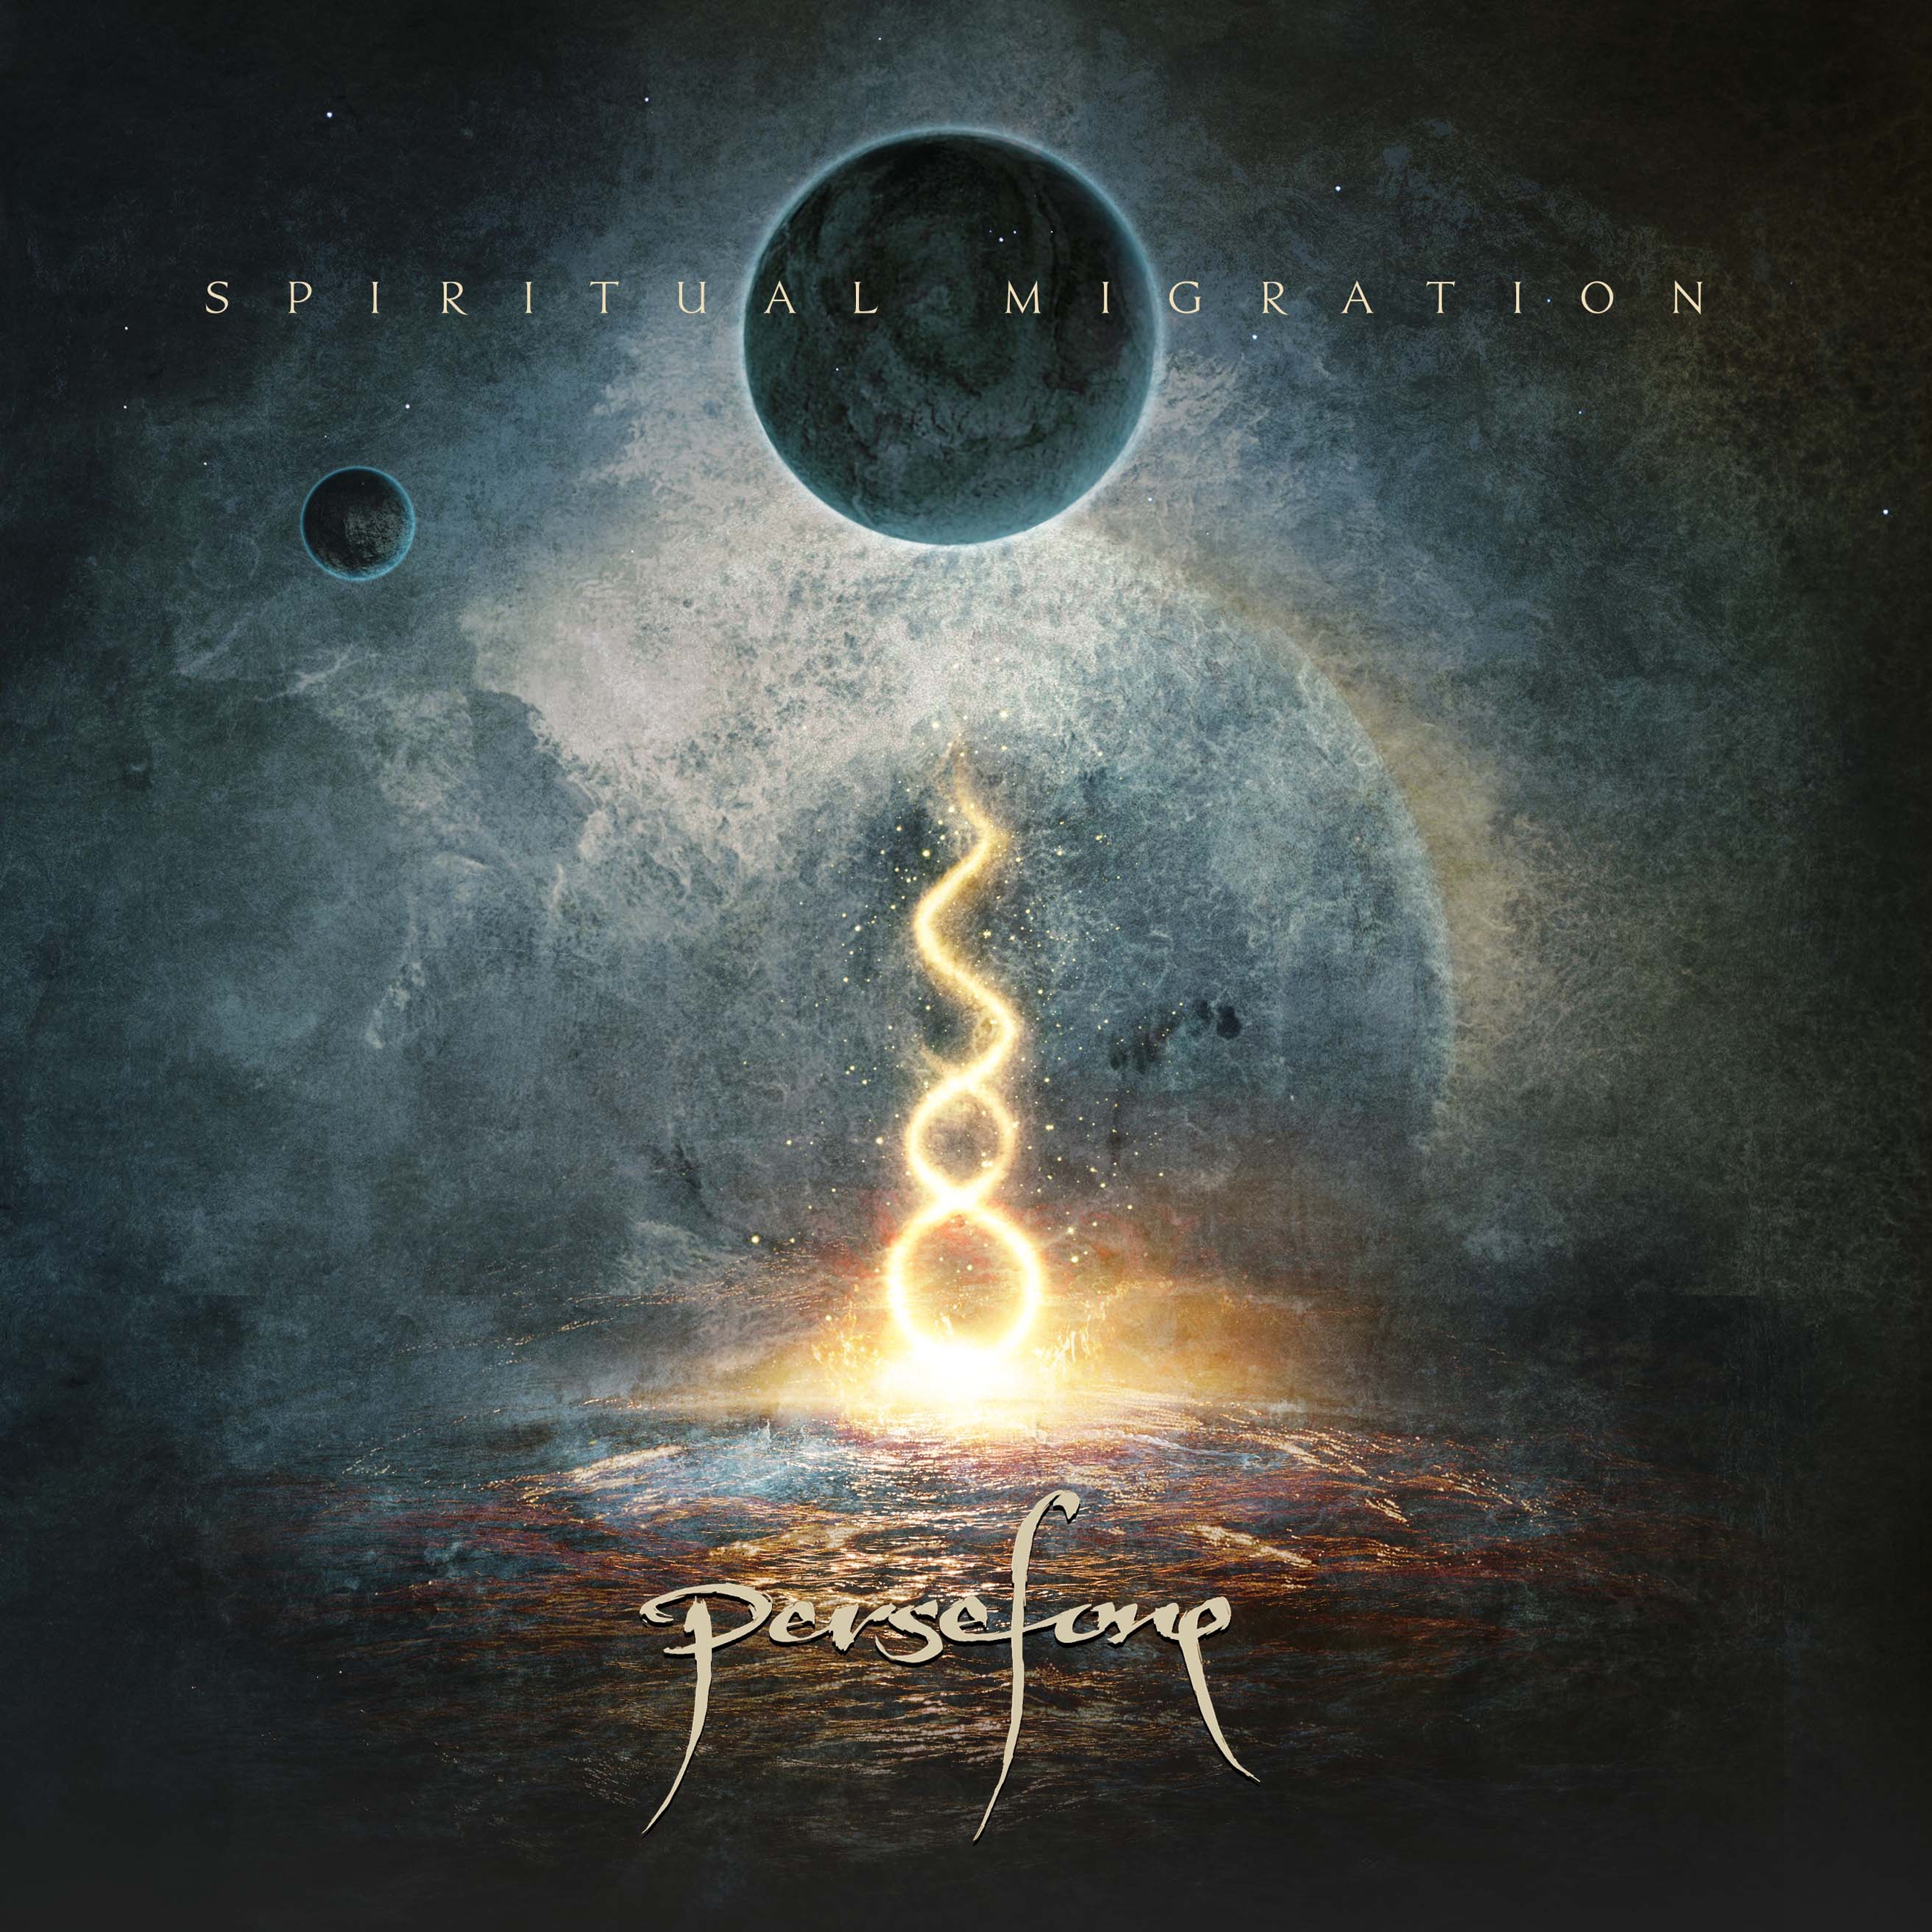 Persefone – Spiritual Migration Review